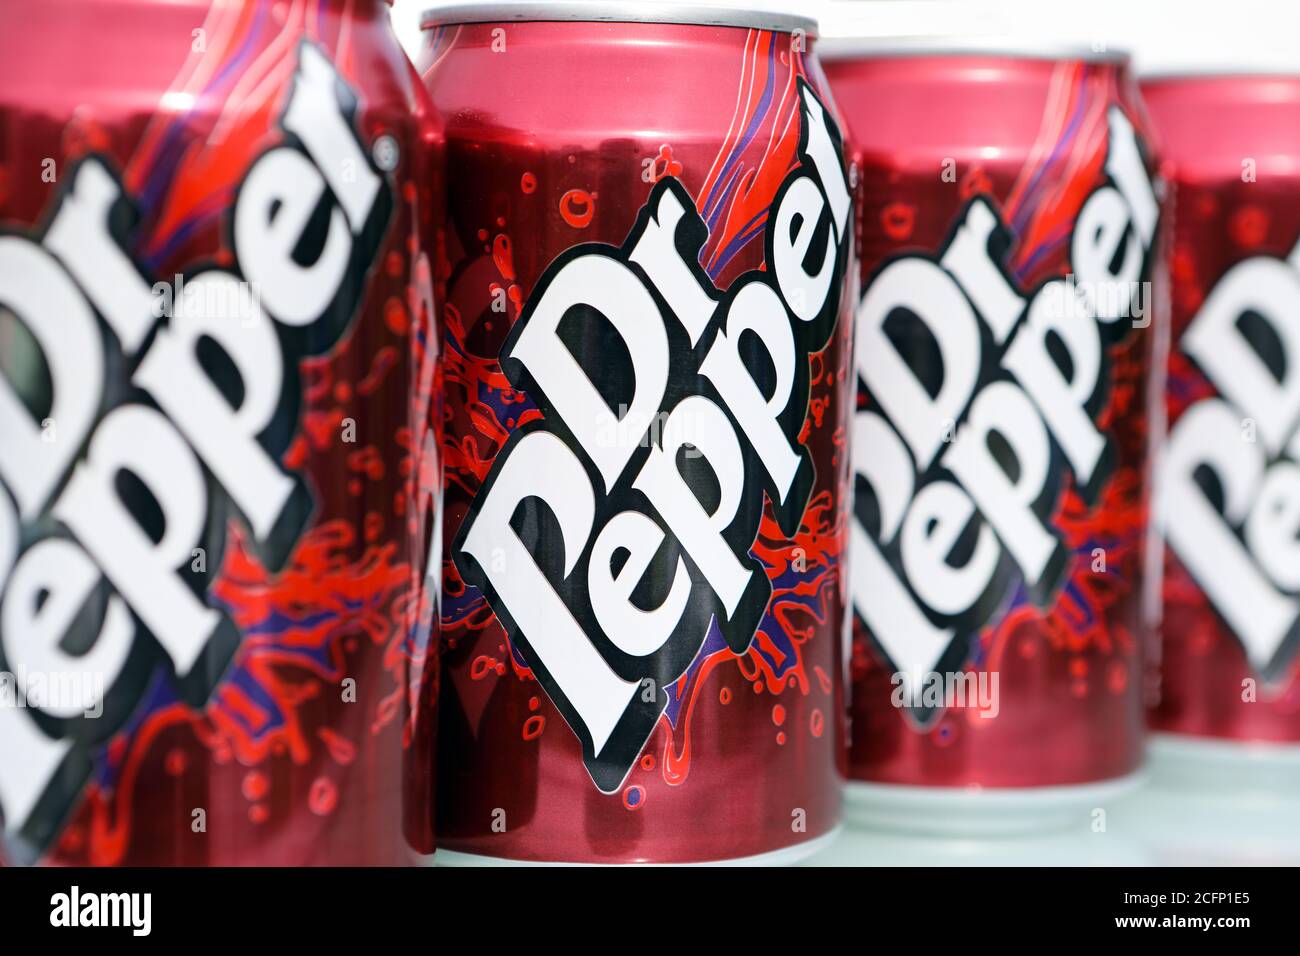 Cans of Dr Pepper Stock Photo